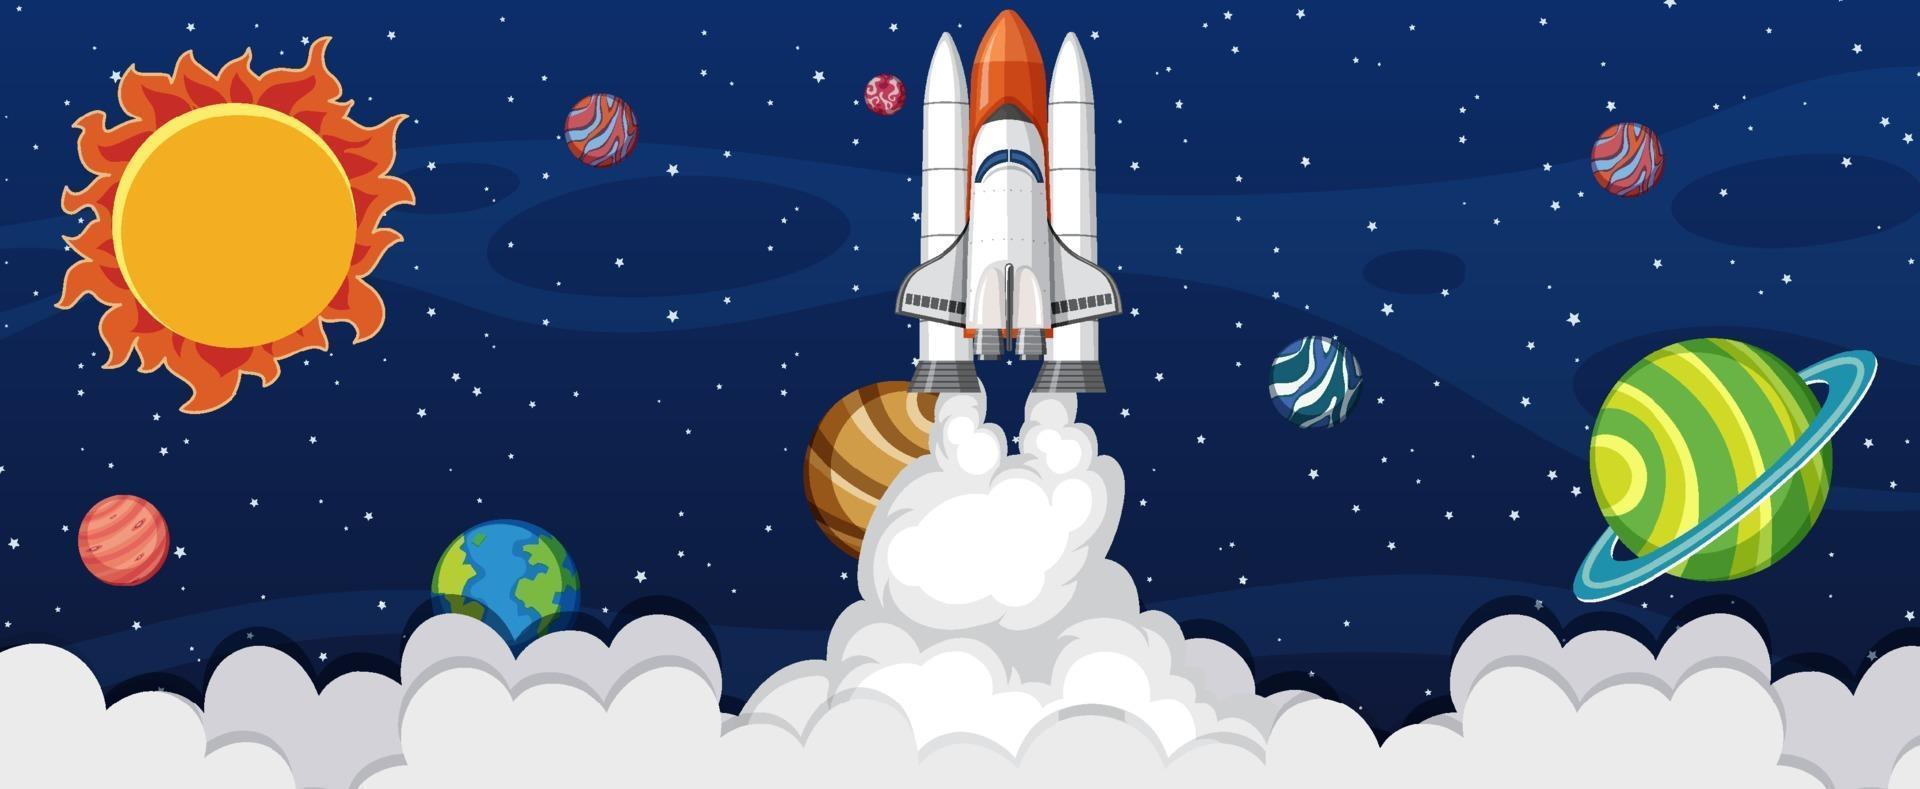 A rocket ship launching in the galaxy scene vector